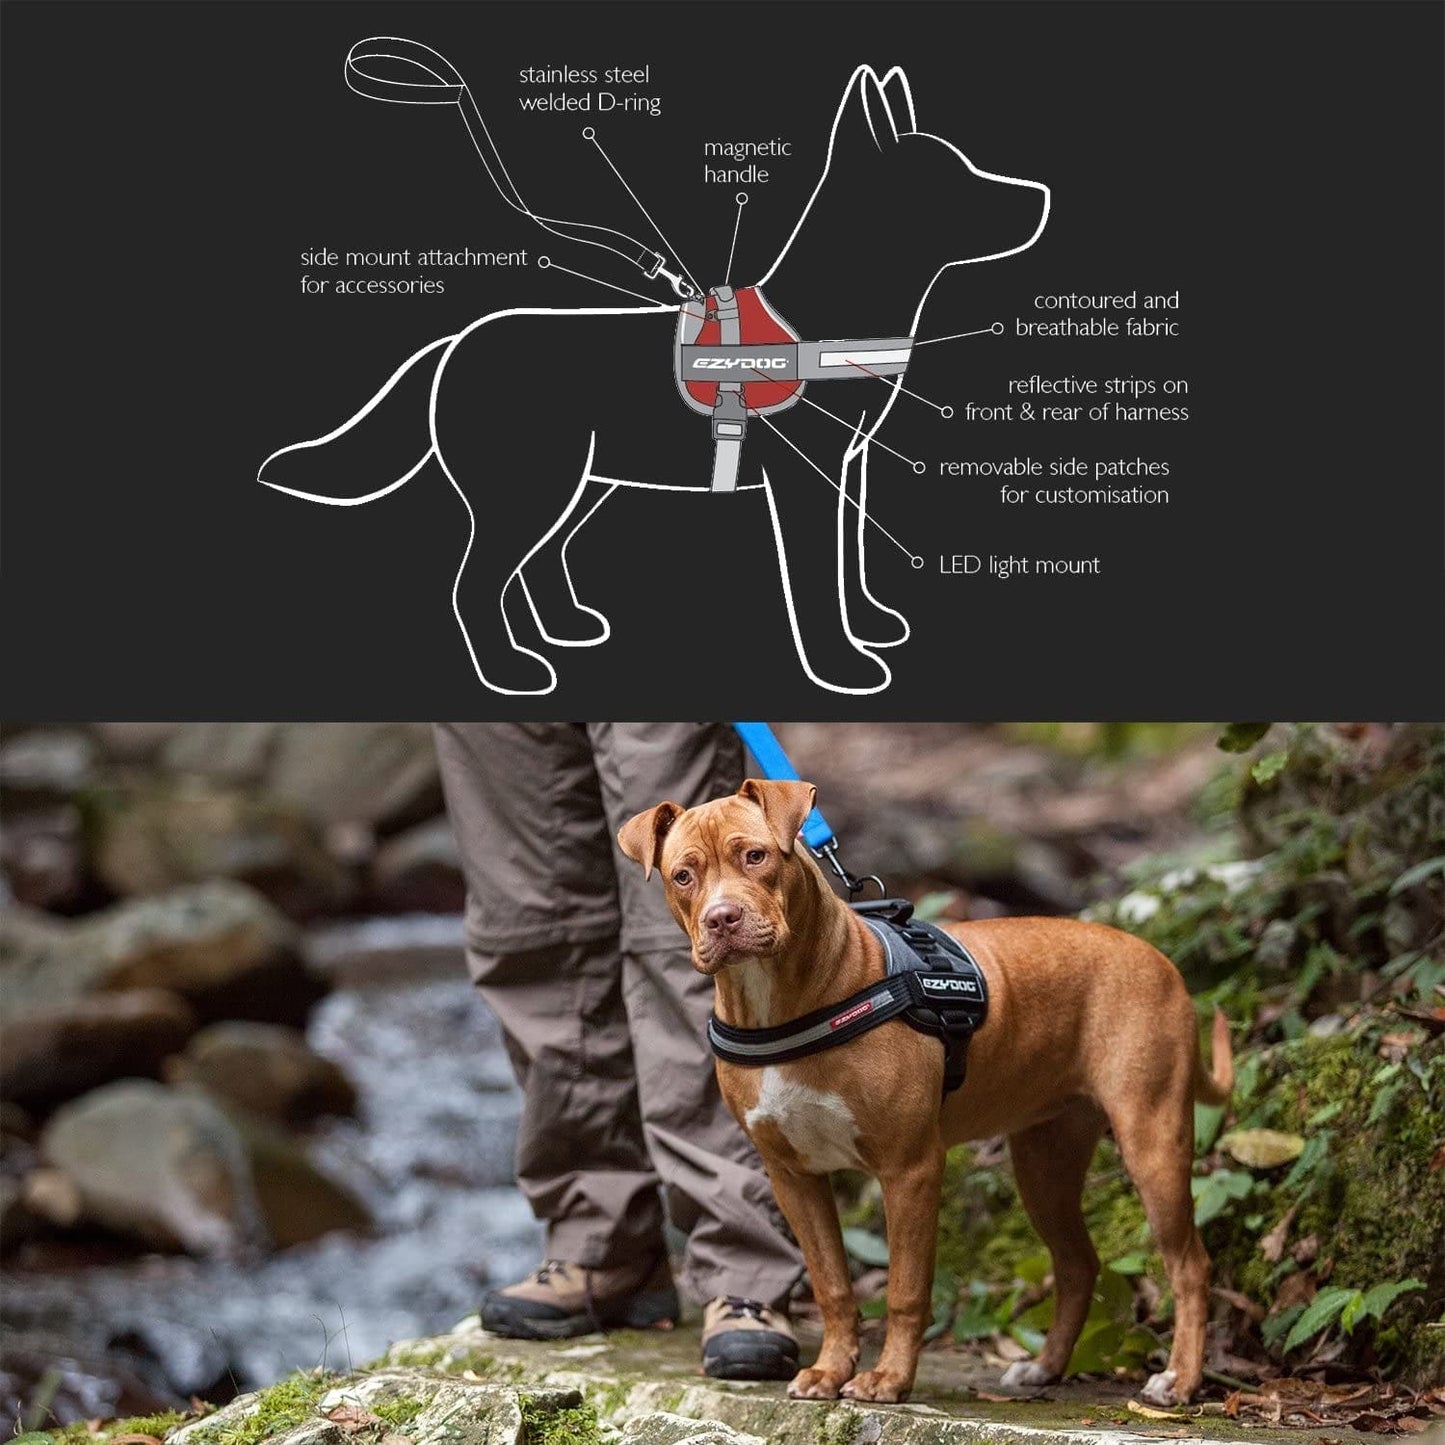 Ezydog Convert Trail-Ready Outdoor Adjustable Dog Harness - Perfect for Hiking, Walking, and Doubles as a Service Dog Vest - Superior Comfort Design with a Durable Traffic Handle (X-Small, Charcoal) Animals & Pet Supplies > Pet Supplies > Dog Supplies > Dog Apparel EzyDog, LLC   